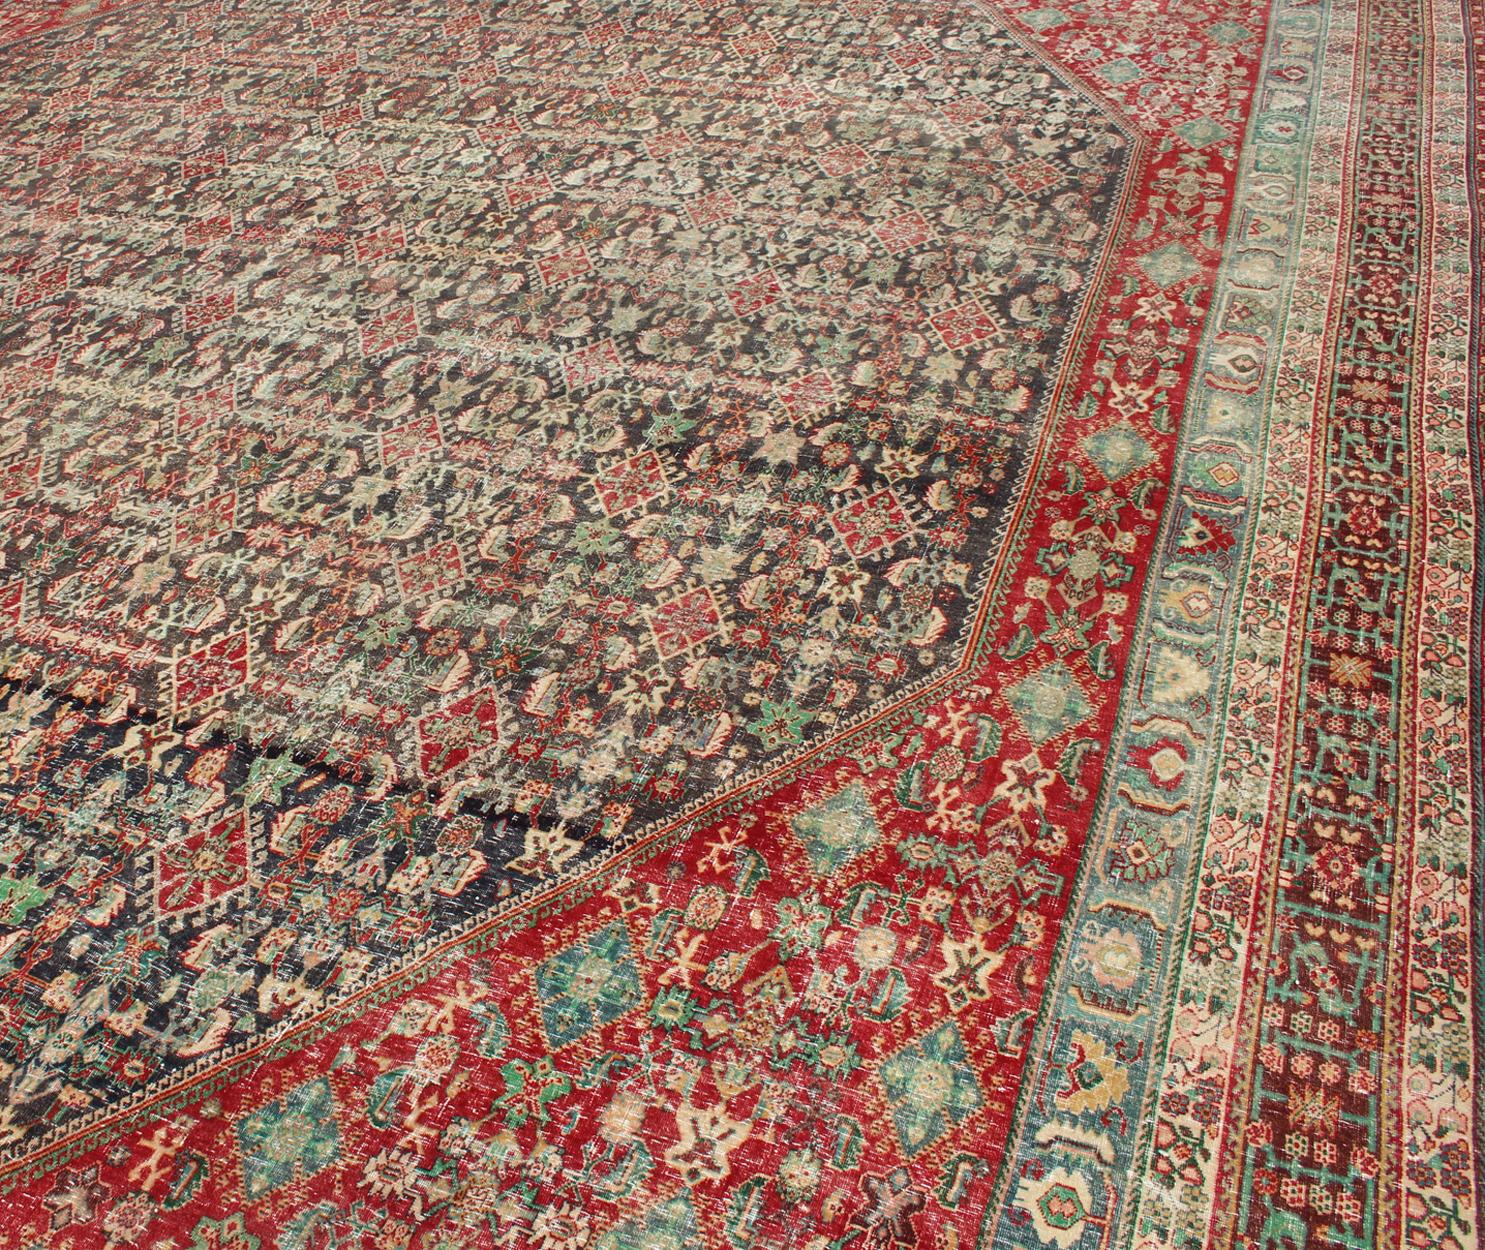 Colorful Large Persian Antique Qashqai rug with A Beautiful Tribal Motif Design For Sale 3